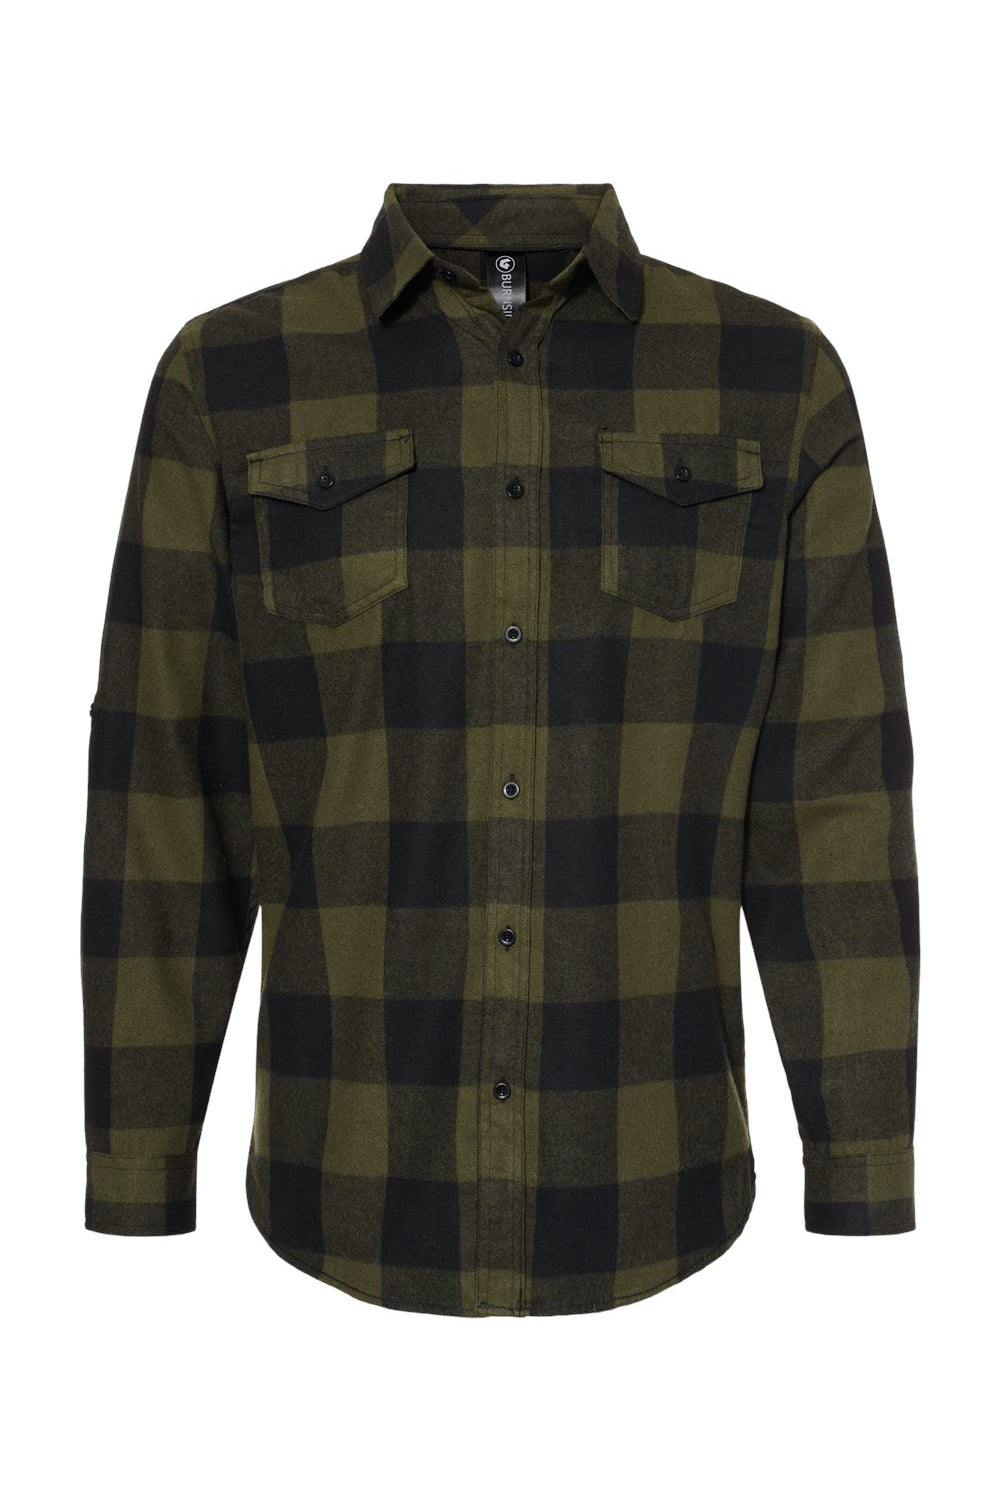 Burnside B8210/8210 Mens Flannel Long Sleeve Button Down Shirt w/ Double Pockets Army Green/Black Flat Front